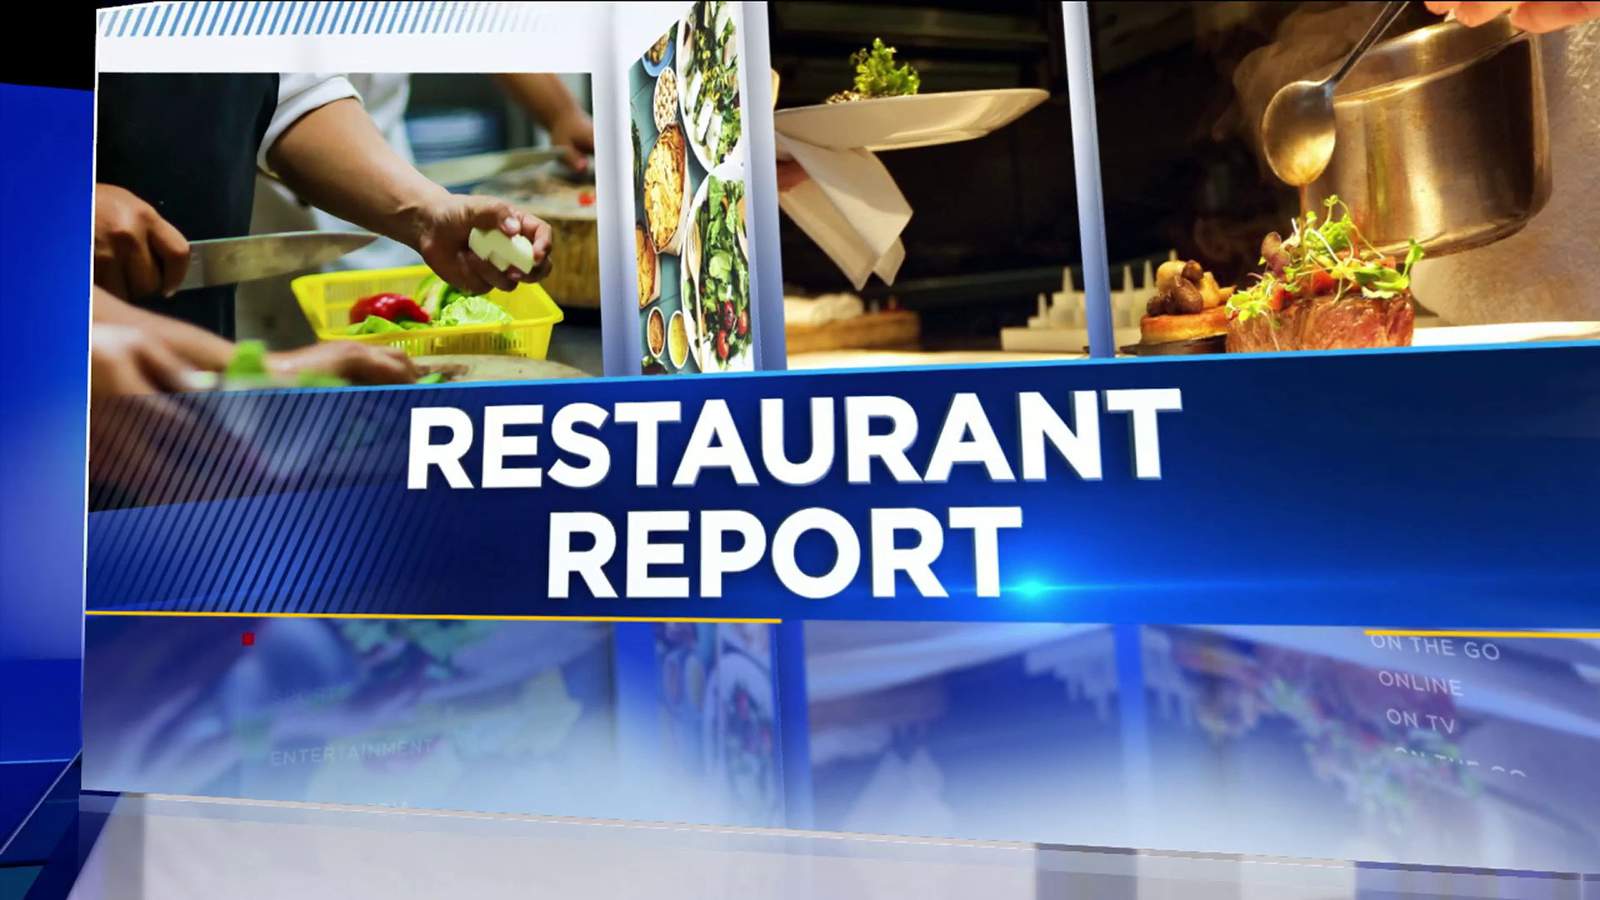 Rodents and roaches: Mexican grill in Palatka temporarily shutdown by health inspectors